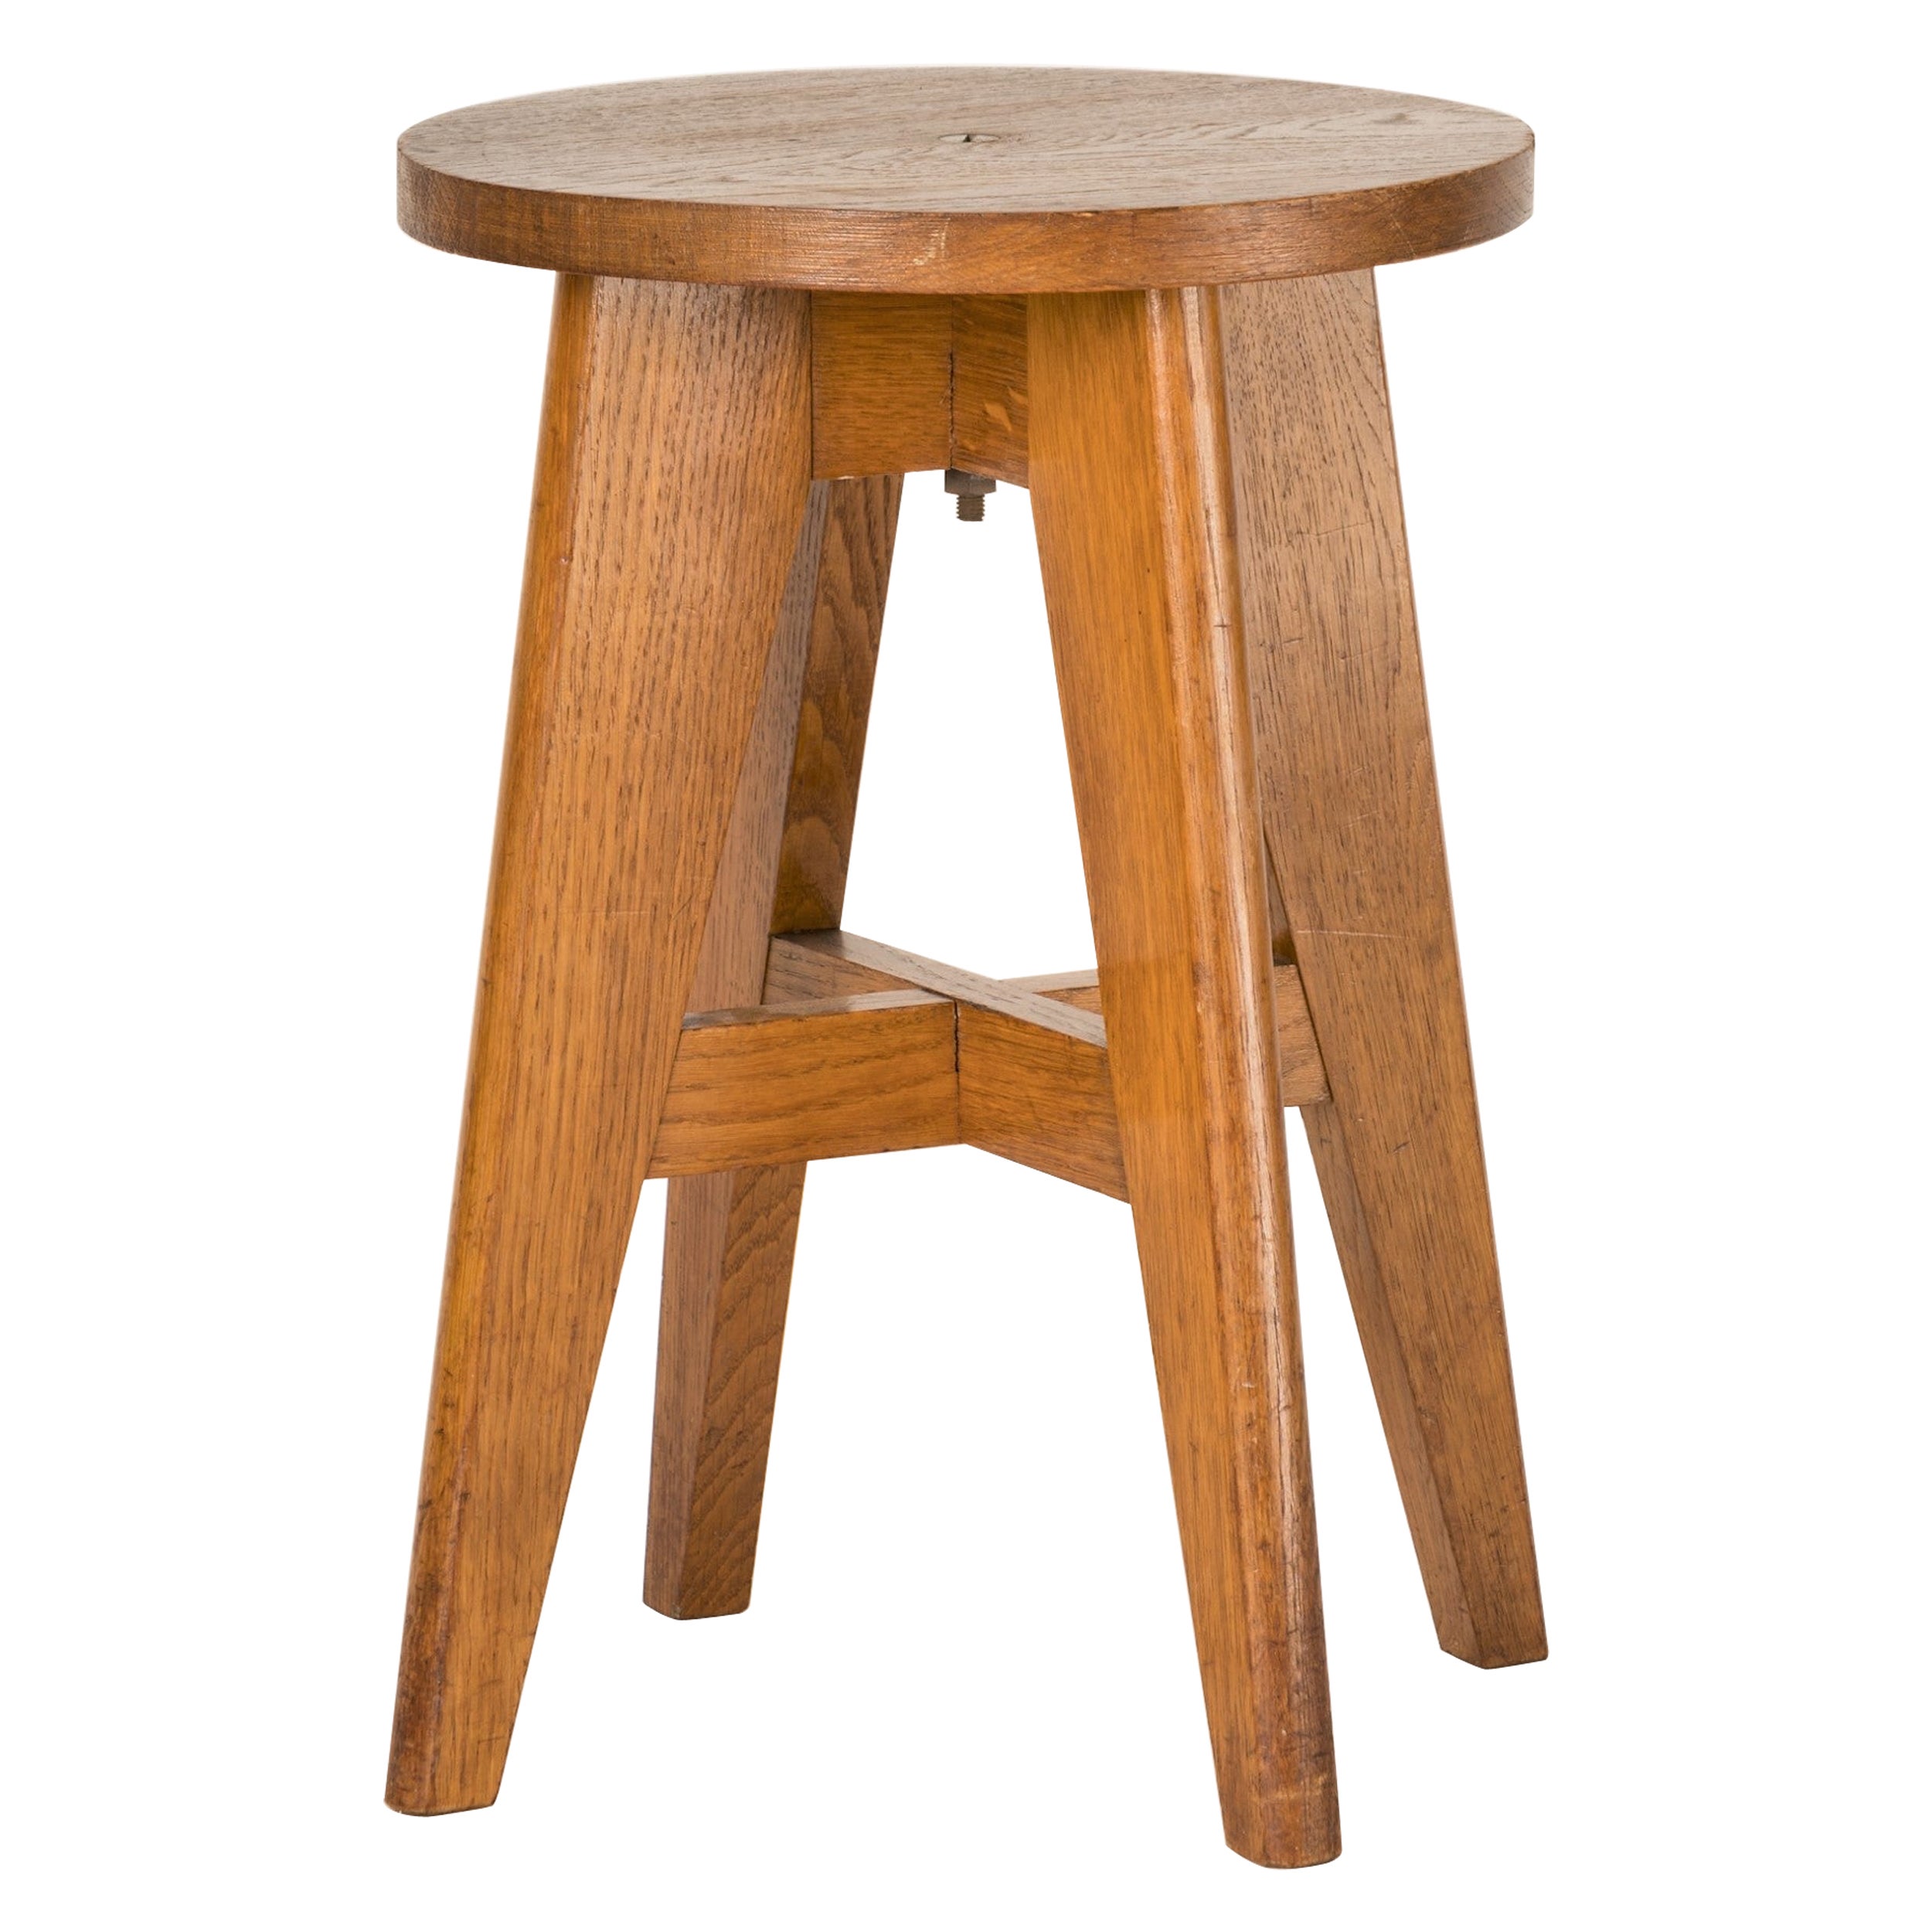 Four Legged Minimalist Oak Stool in the style of Jeanneret, France 1960's For Sale